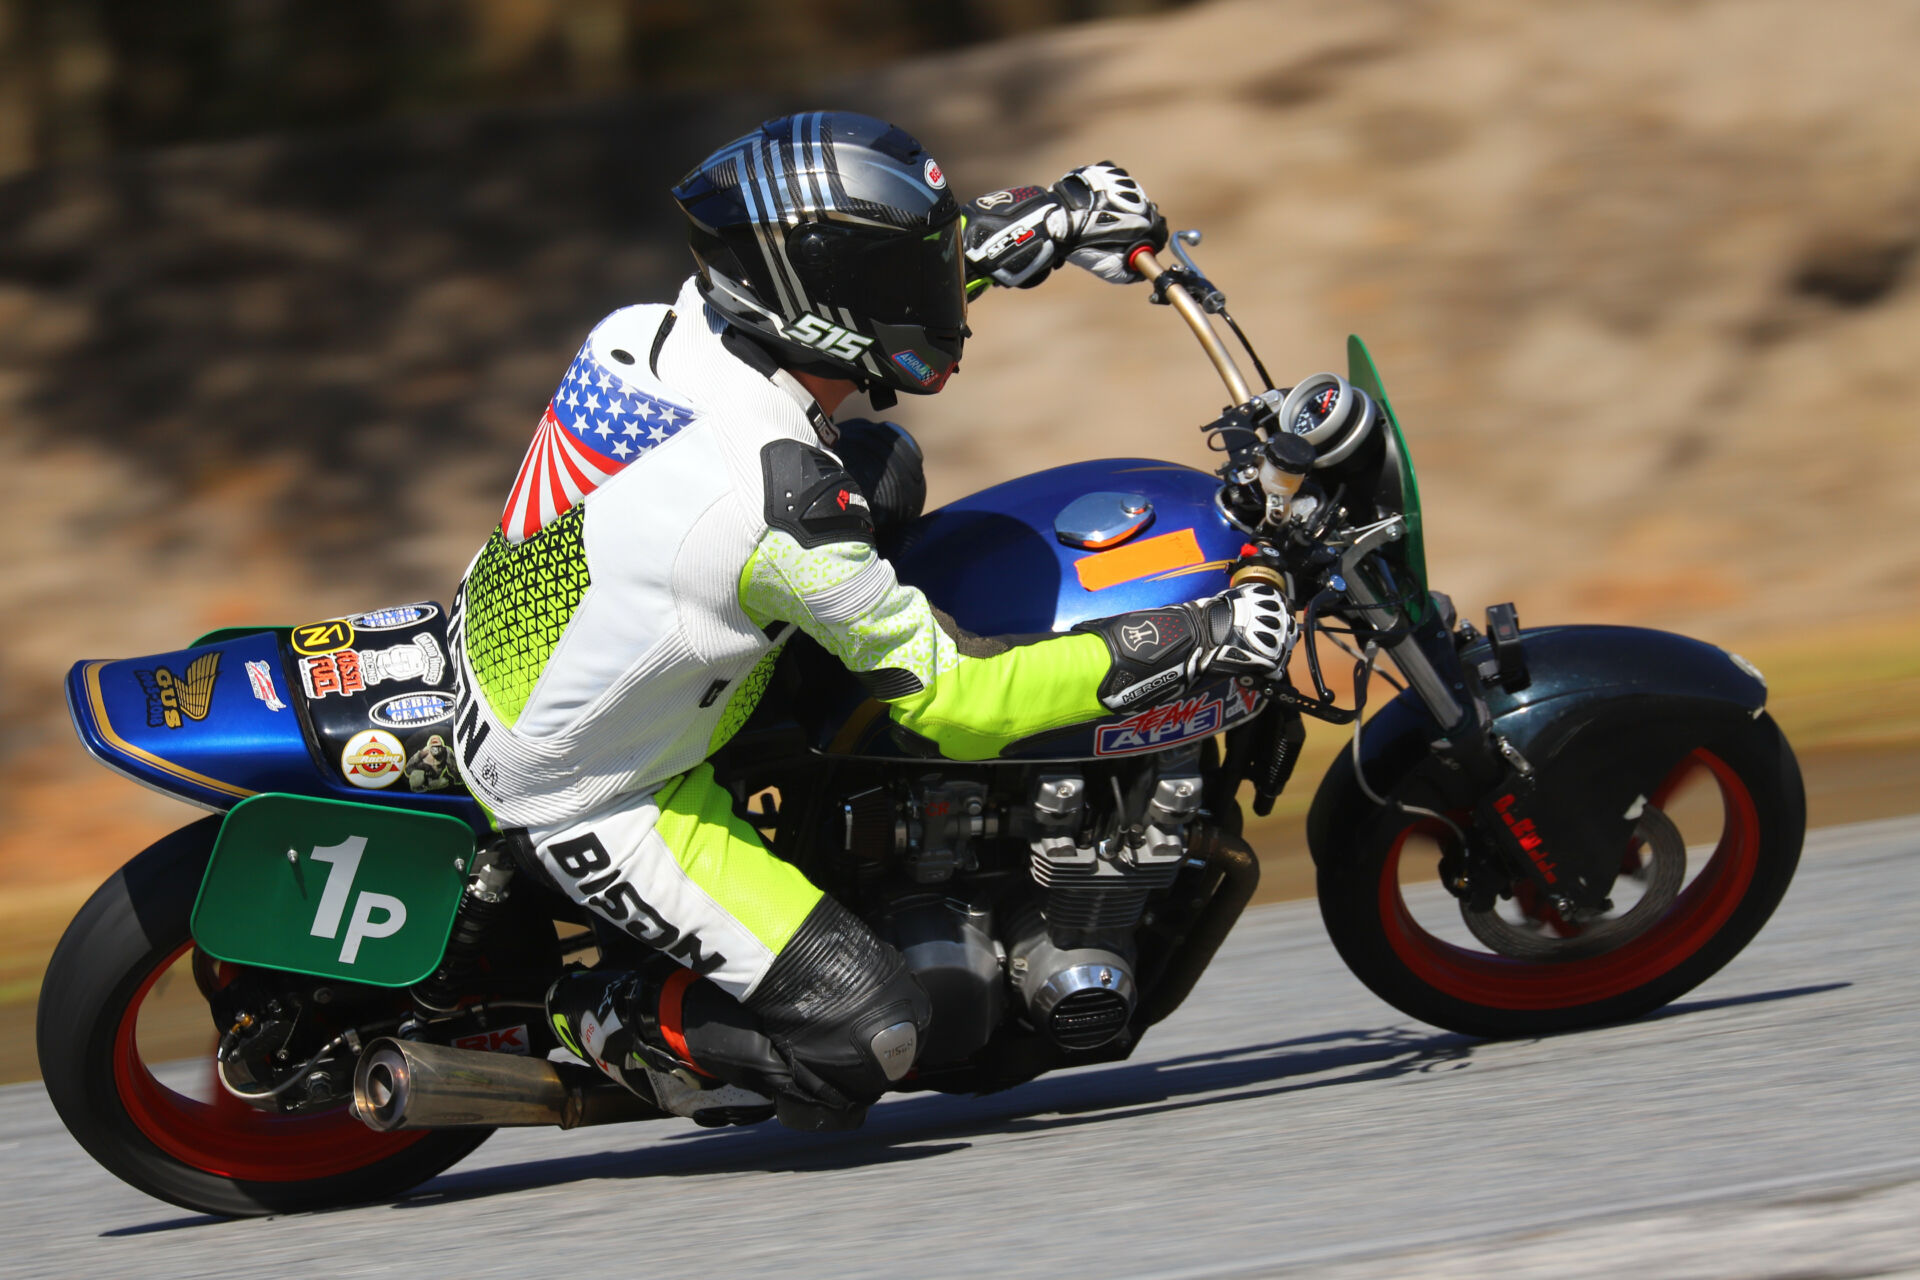 Jeremy Maddrill (1P) rode his 1979 Kawasaki KZ650 to victories in both AHRMA Vintage Cup races featuring the Vintage Superbike Heavyweight class at Roebling Road Raceway. Photo by etechphoto.com, courtesy AHRMA.